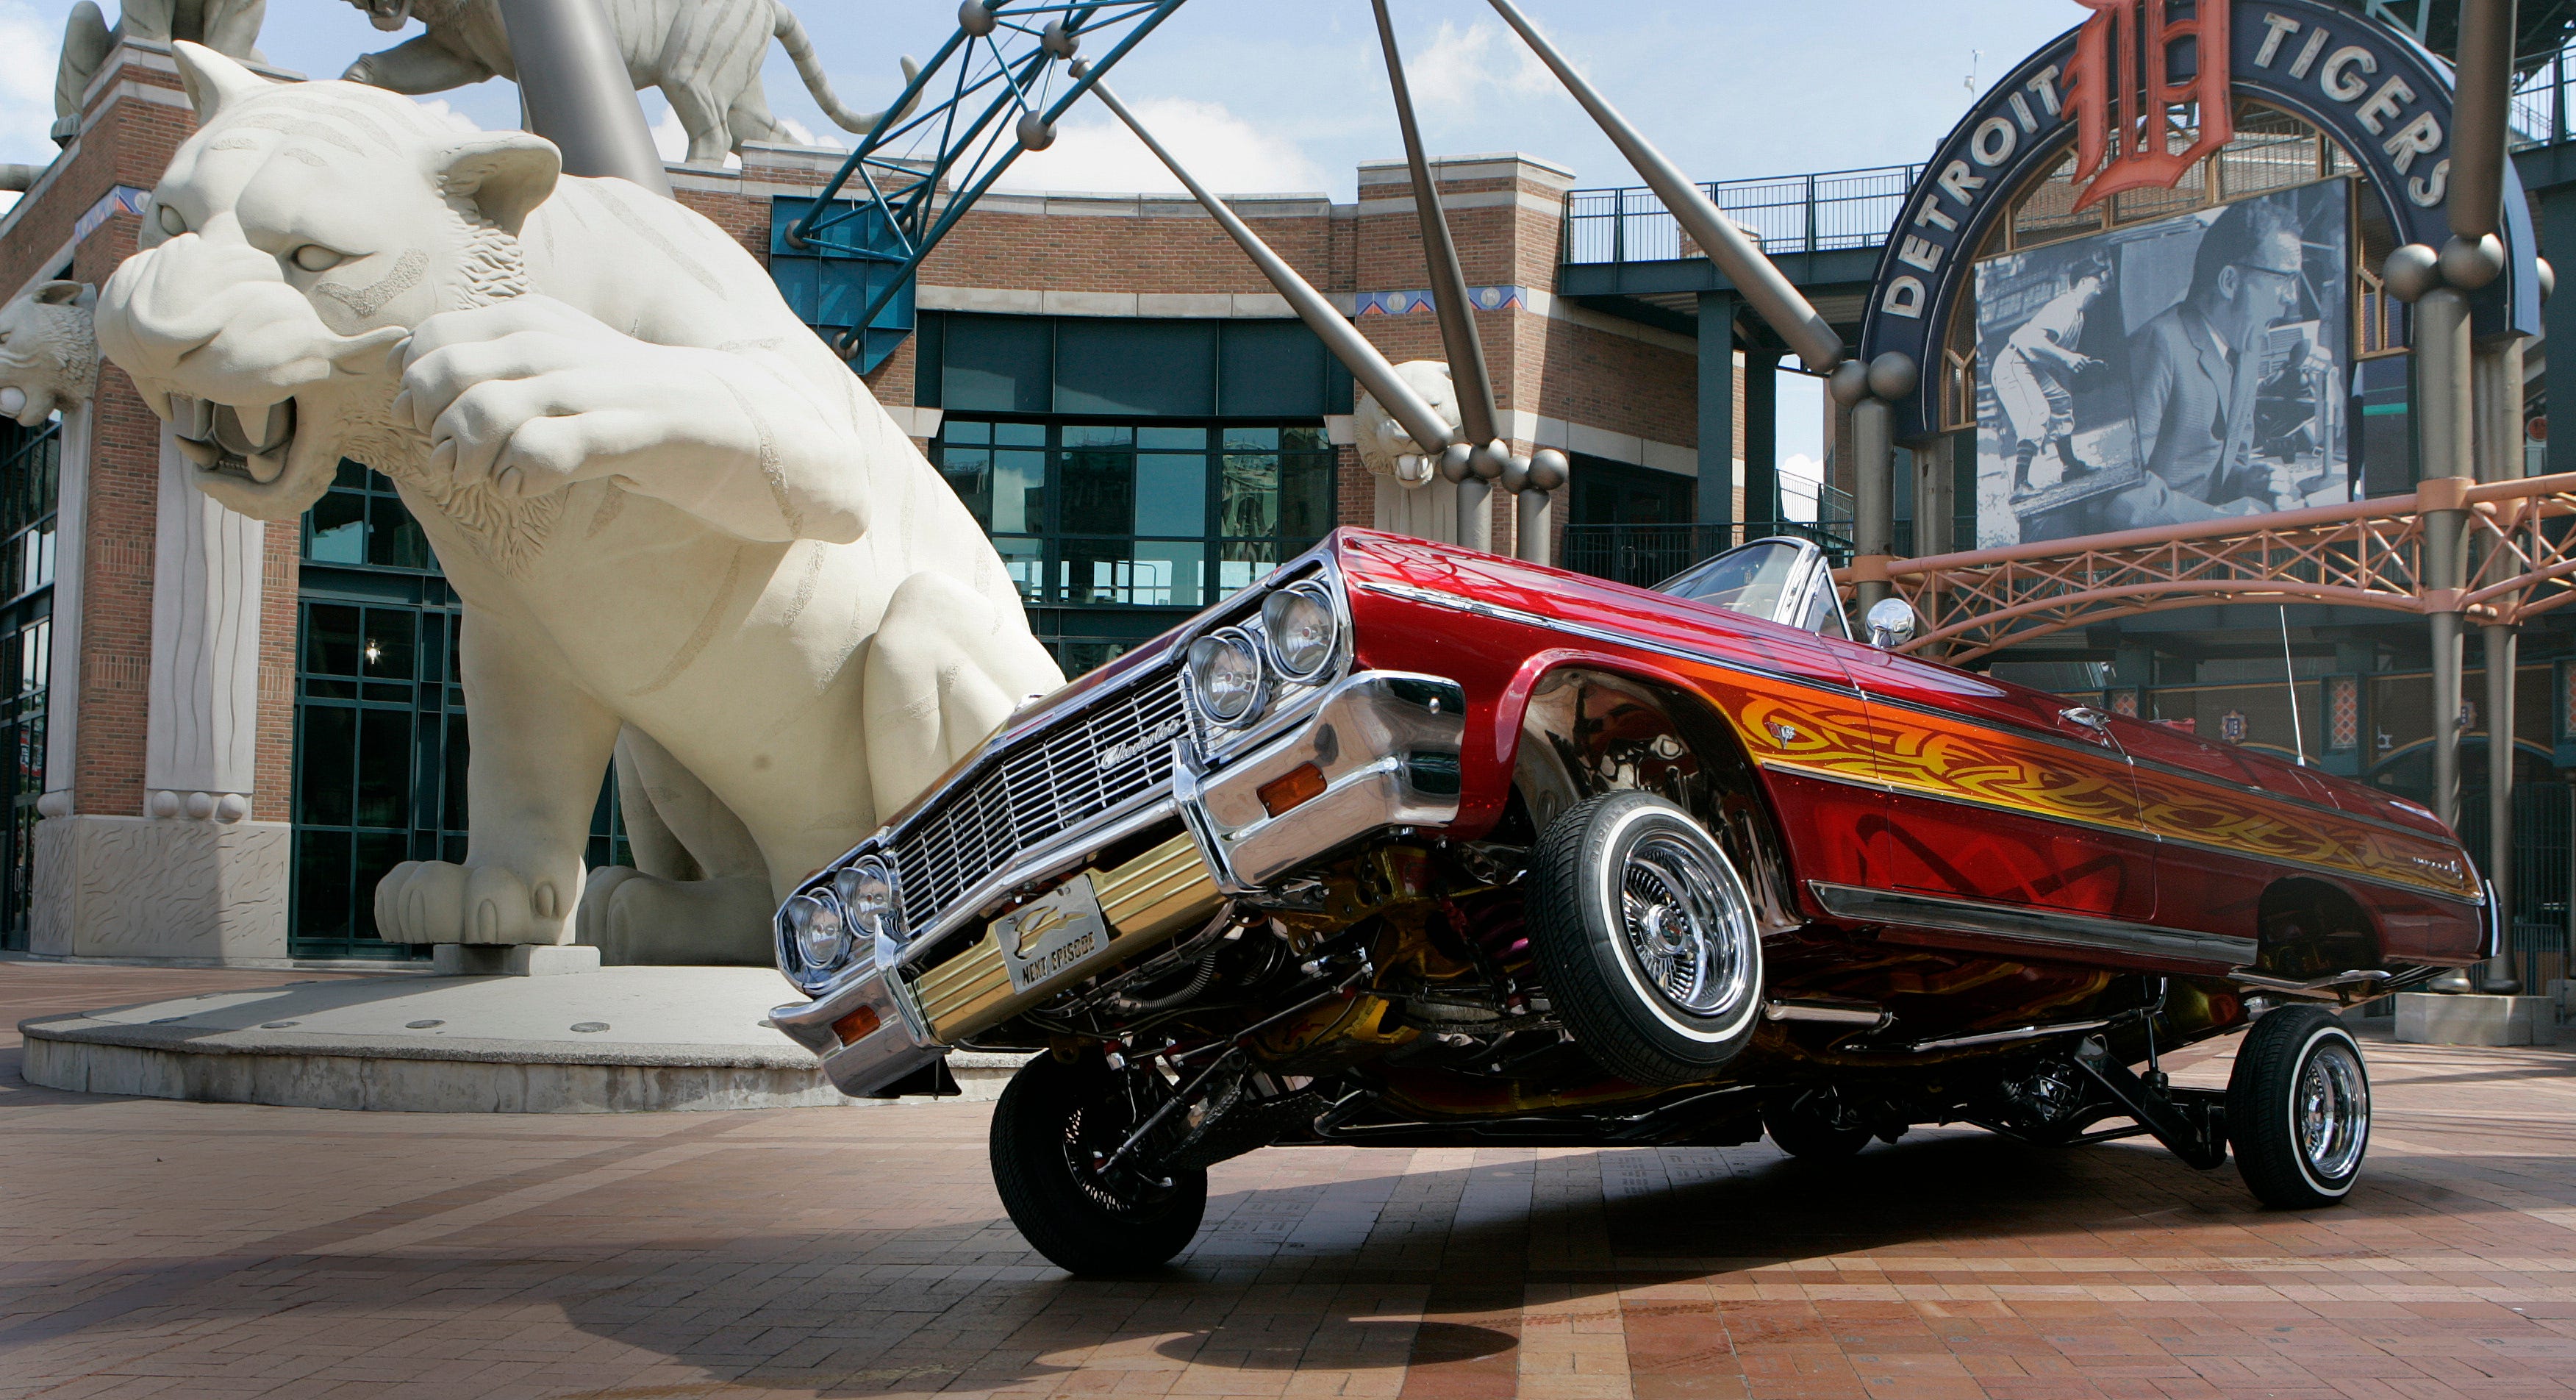 A 1964 Chevy Impala, owned by Thomas Cavataio of Grosse Pointe Woods, outside Comerica Park in Detroit, June 24, 2008.